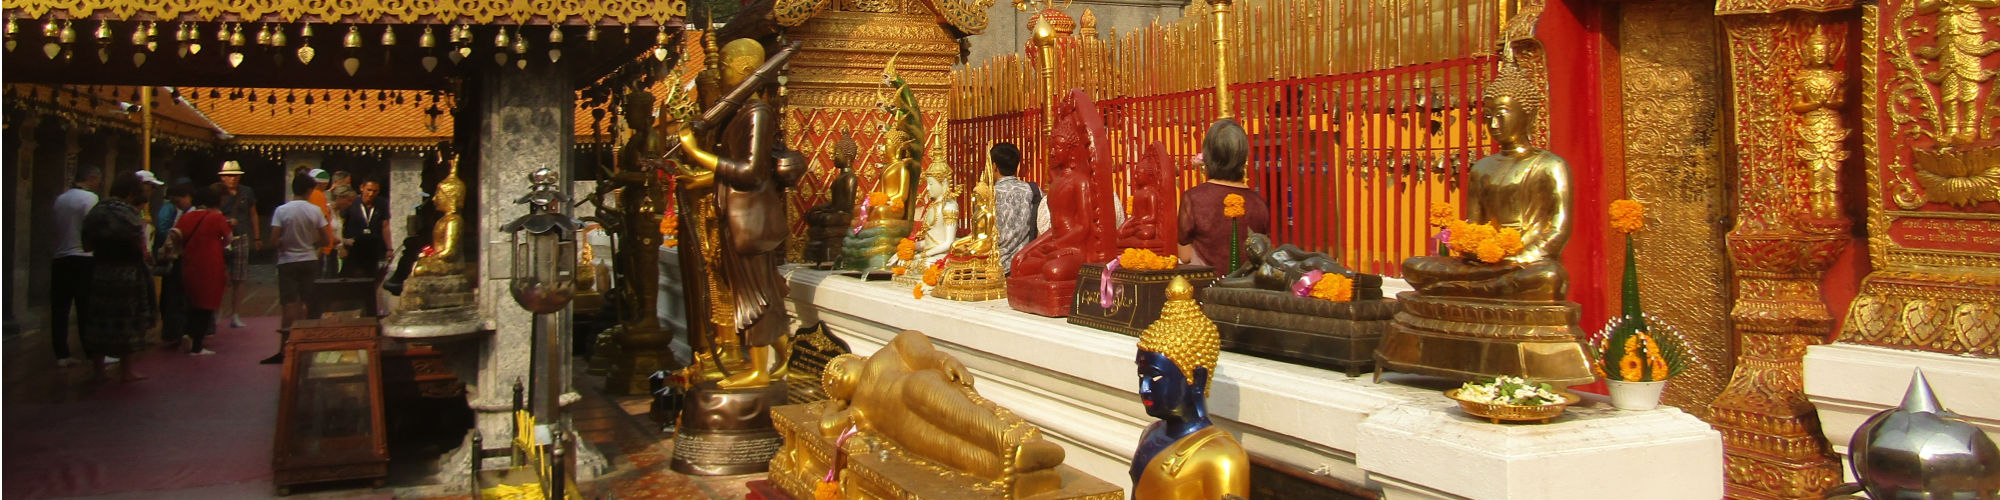 Wat Phra That Doi Suthep, Mueang Chaing Mai District, Chiang Mai Province